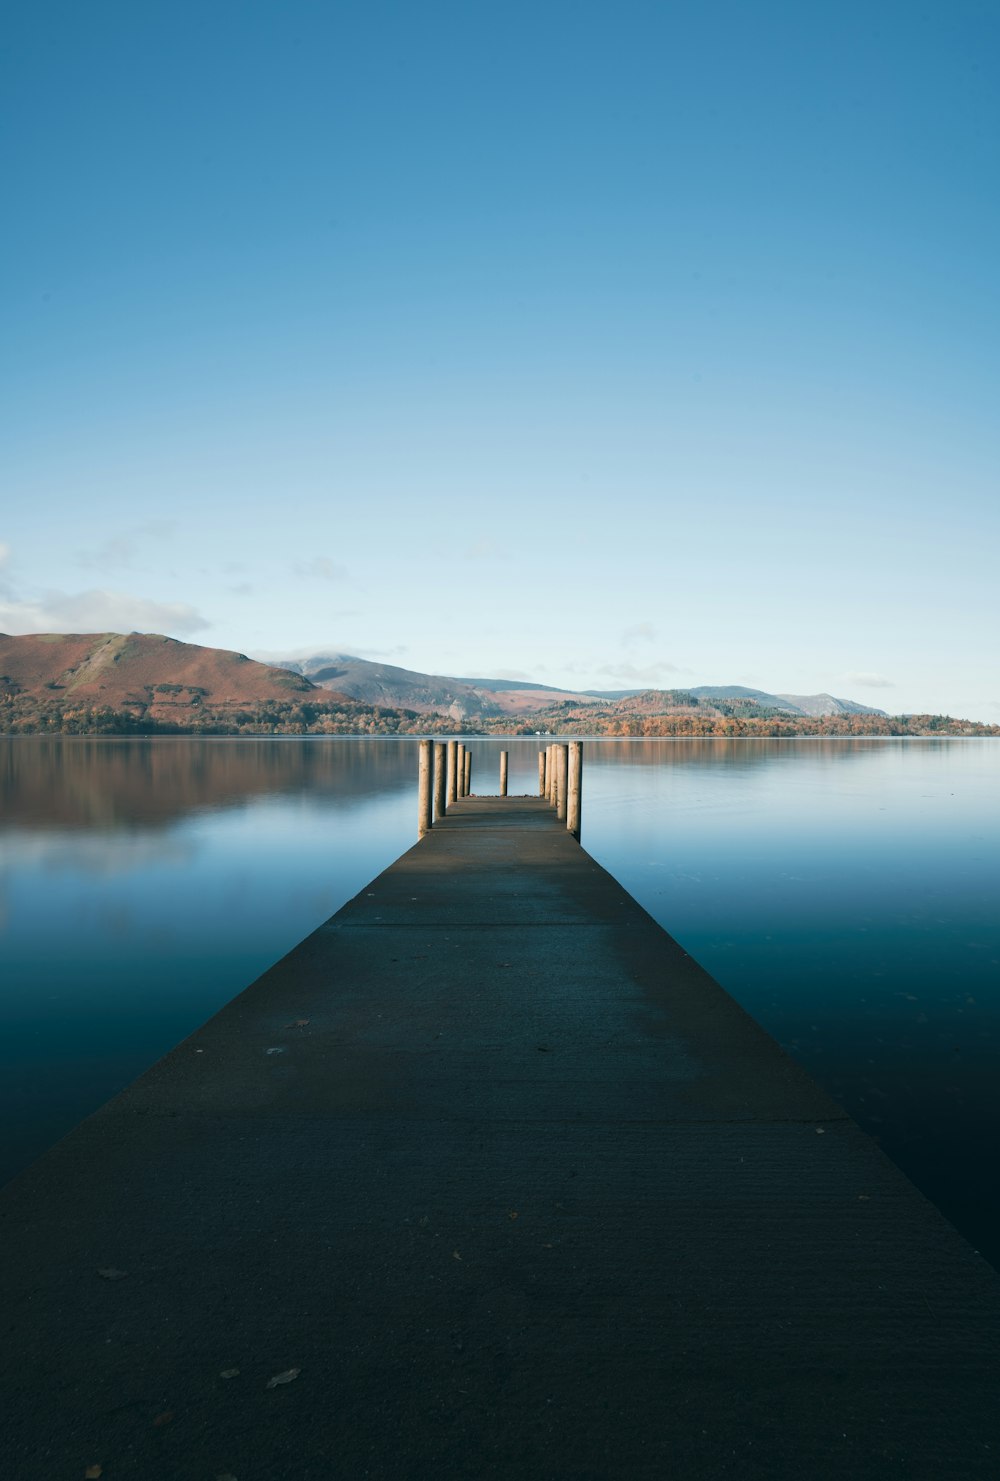 a long pier extending into a body of water